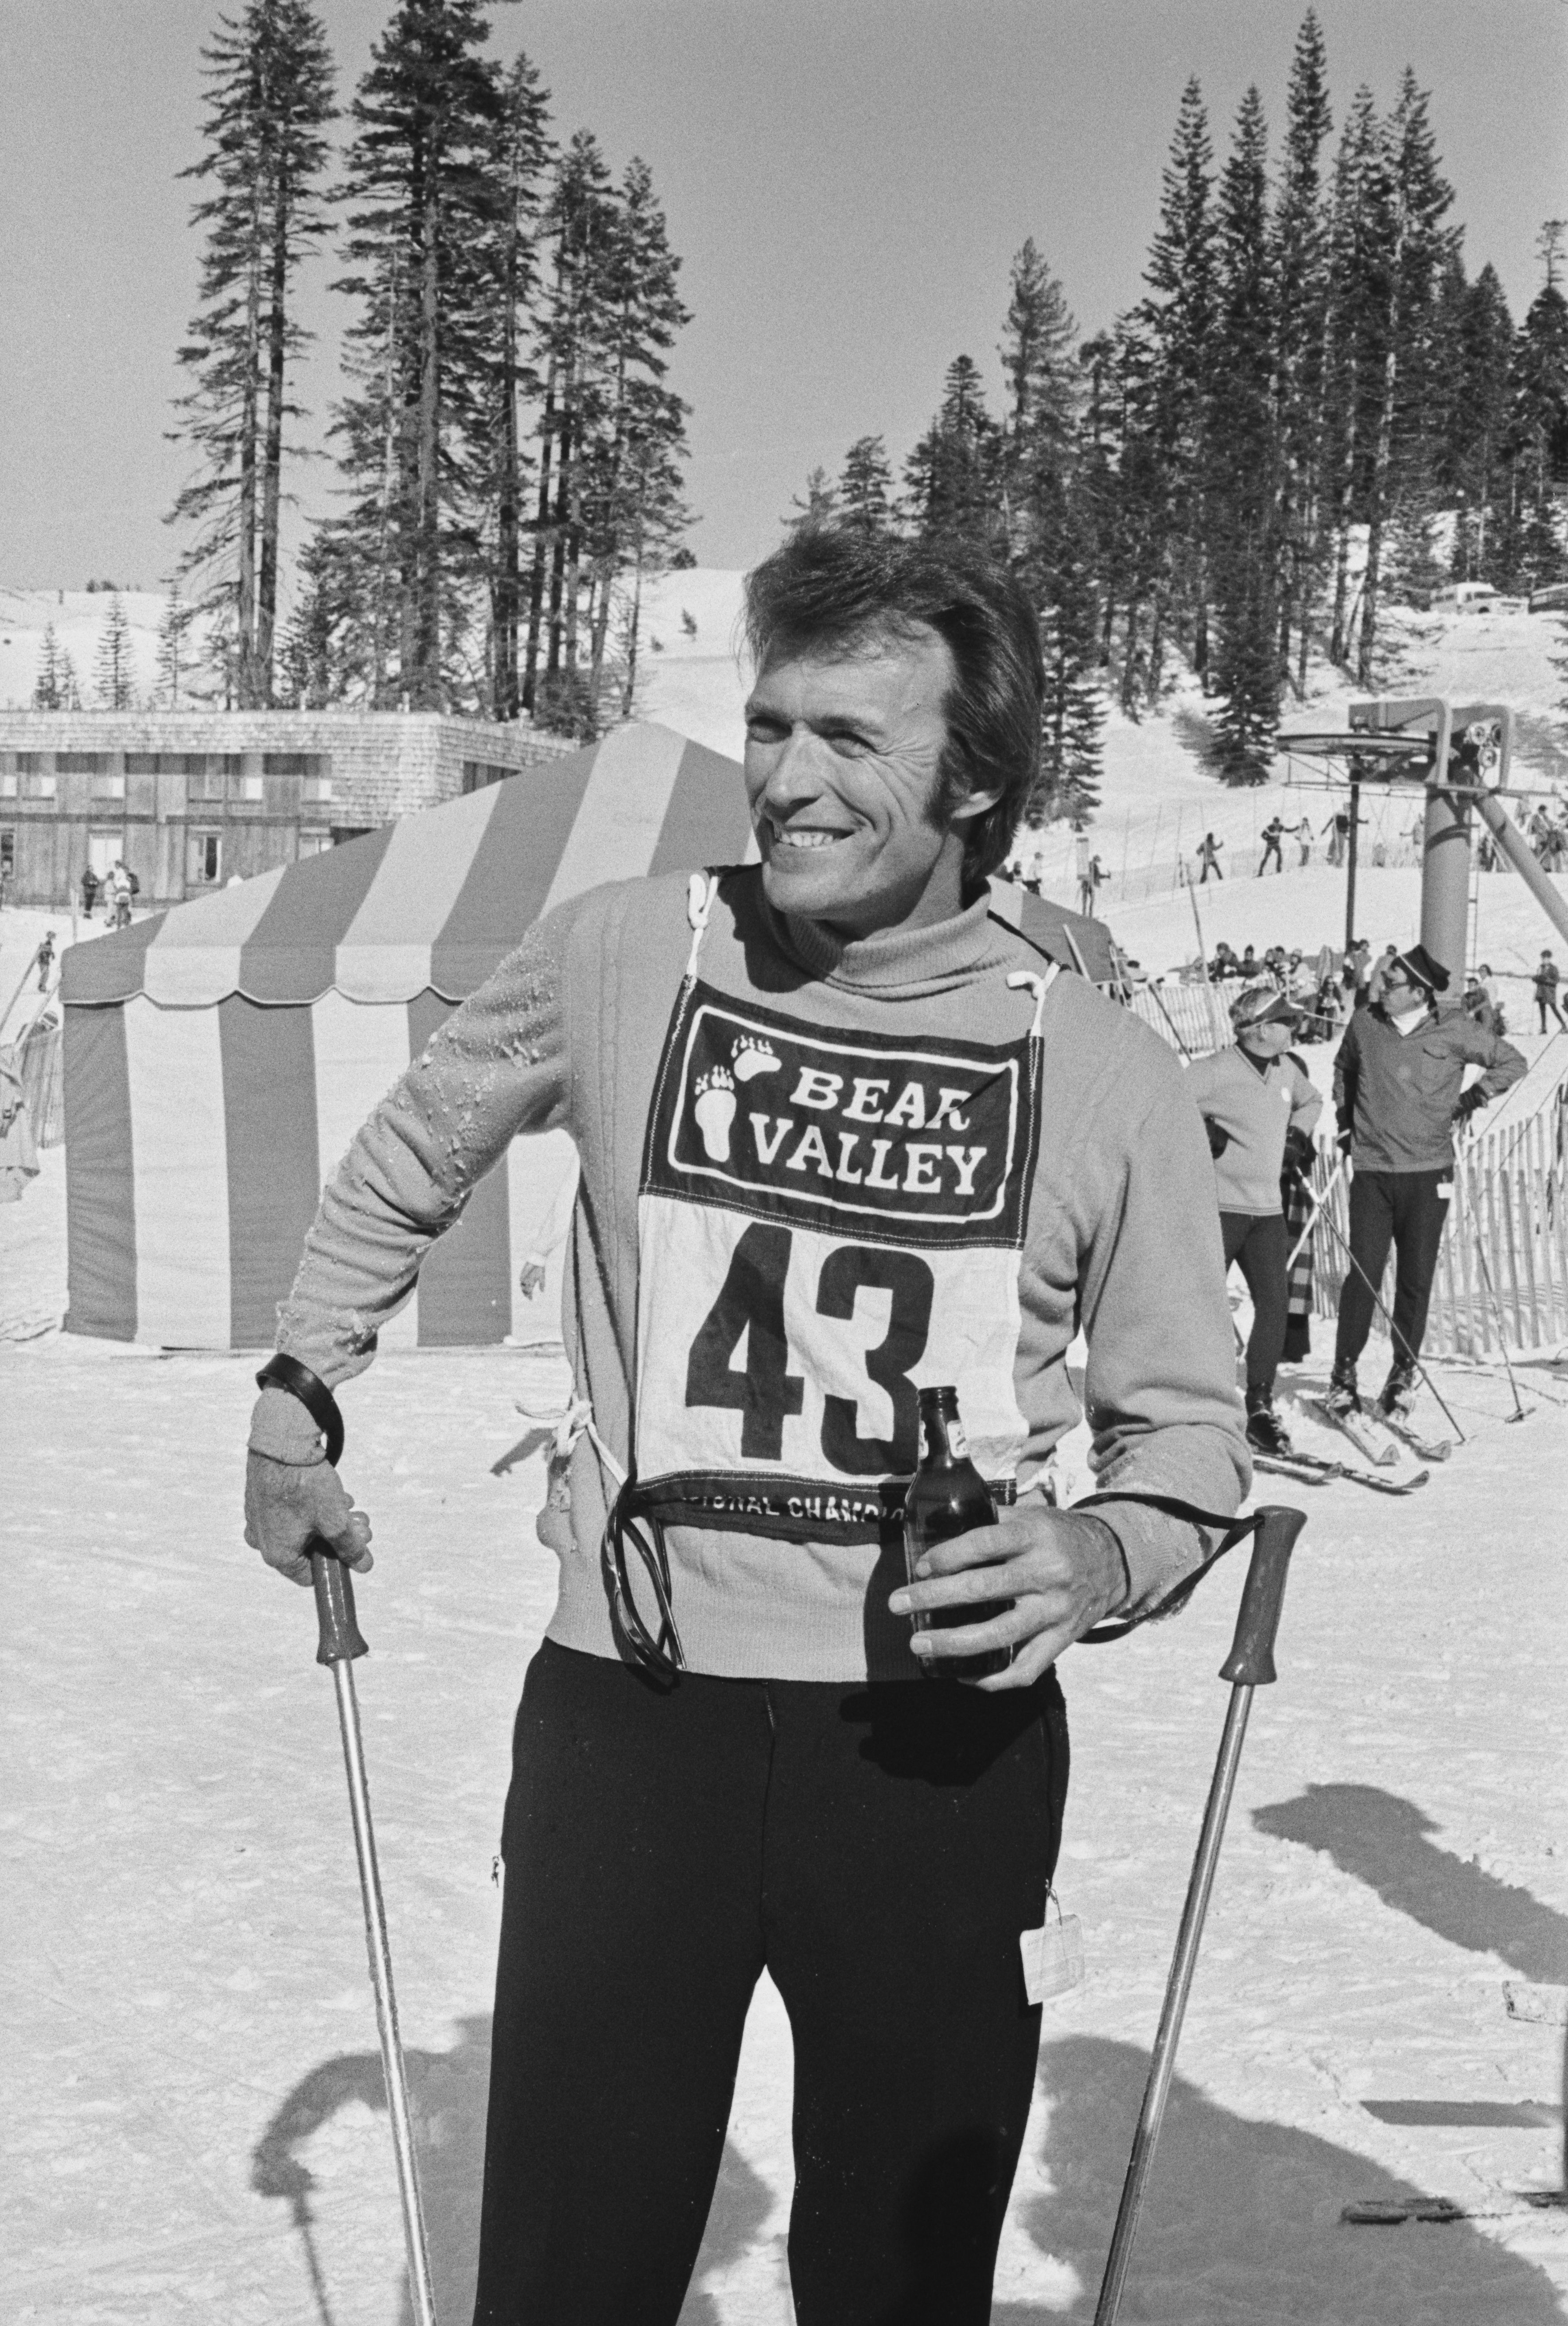 Clint Eastwood at a Benson & Hedges celebrity ski race in Bear Valley, California, on March 5, 1971. | Source: Getty Images